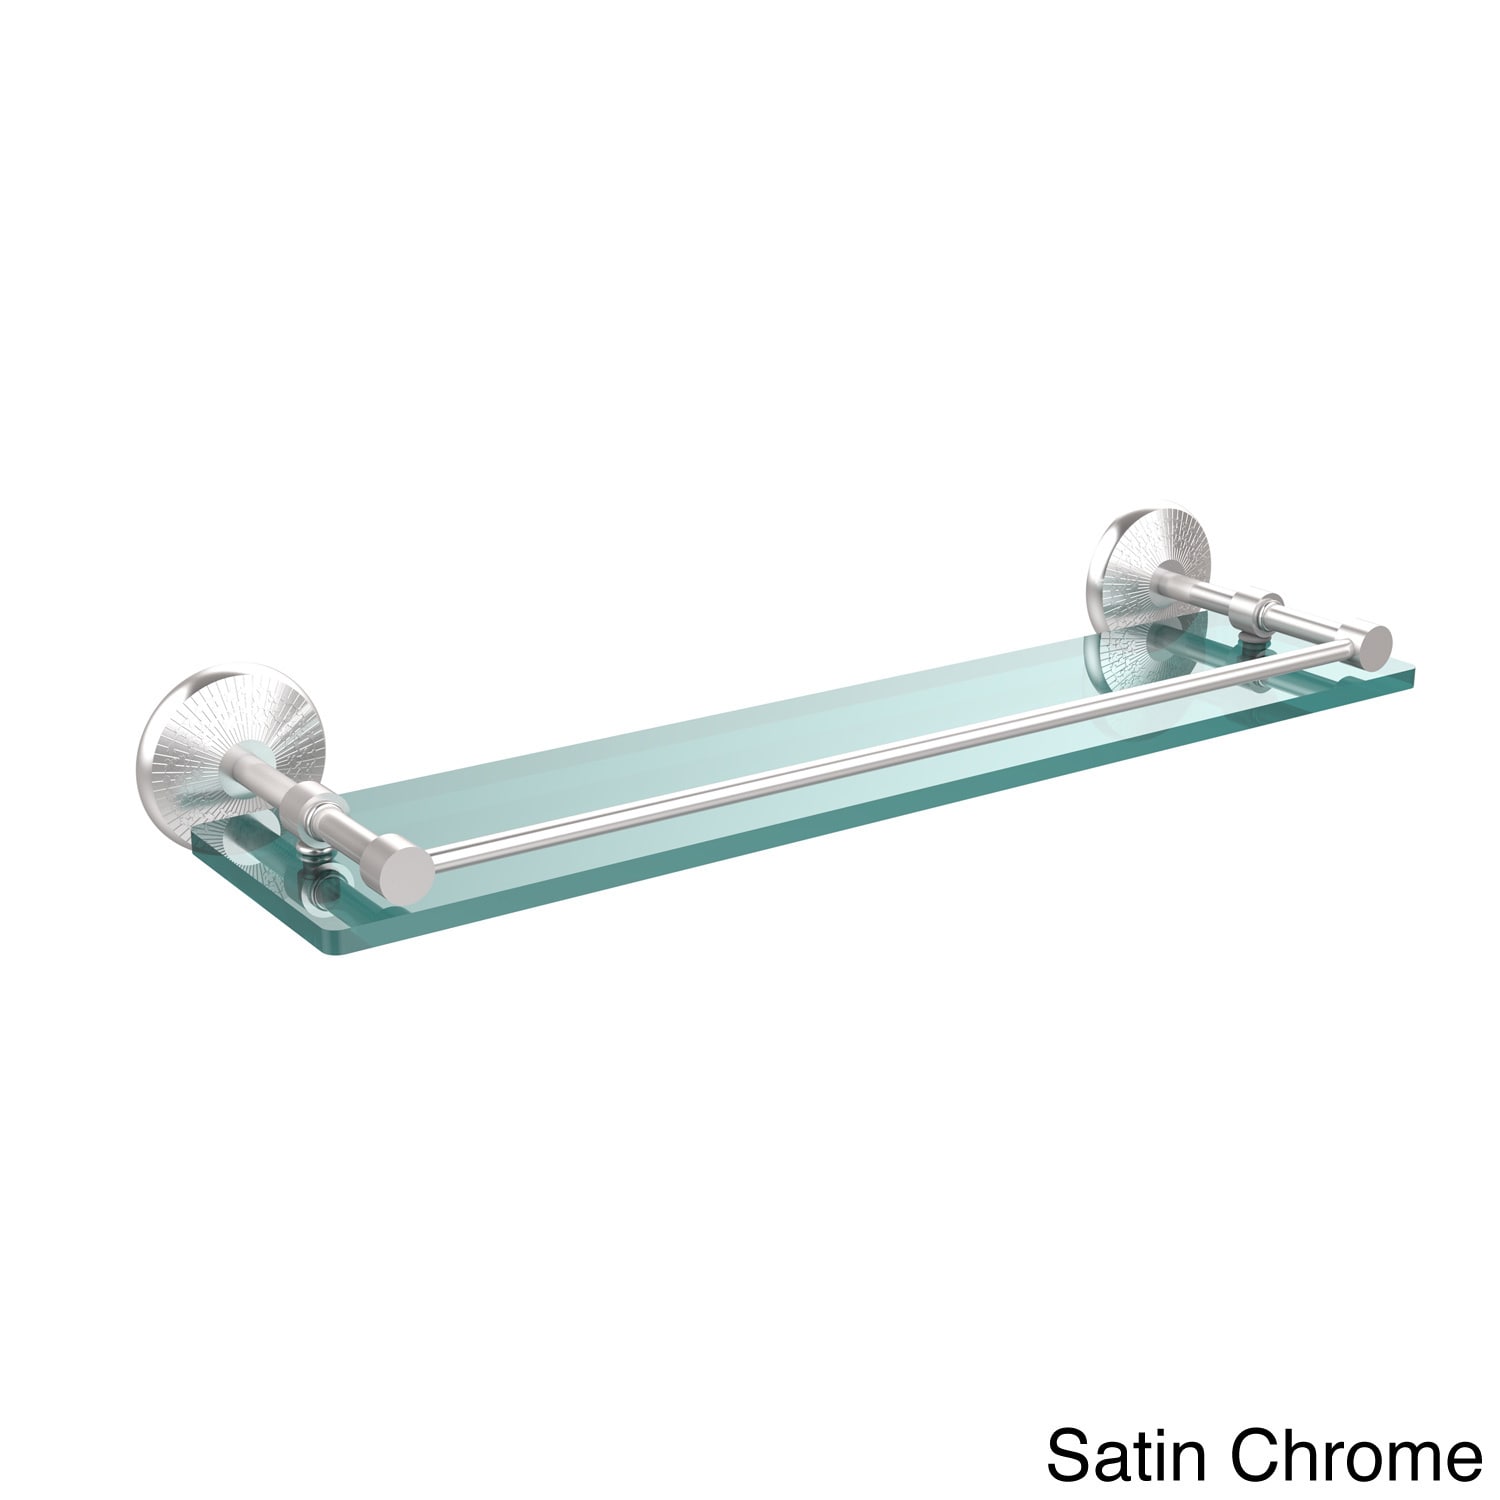 Monte Carlo Collection Tempered Glass Shelf with Gallery Rail - Satin Nickel / 22 Inch - image 3 of 5